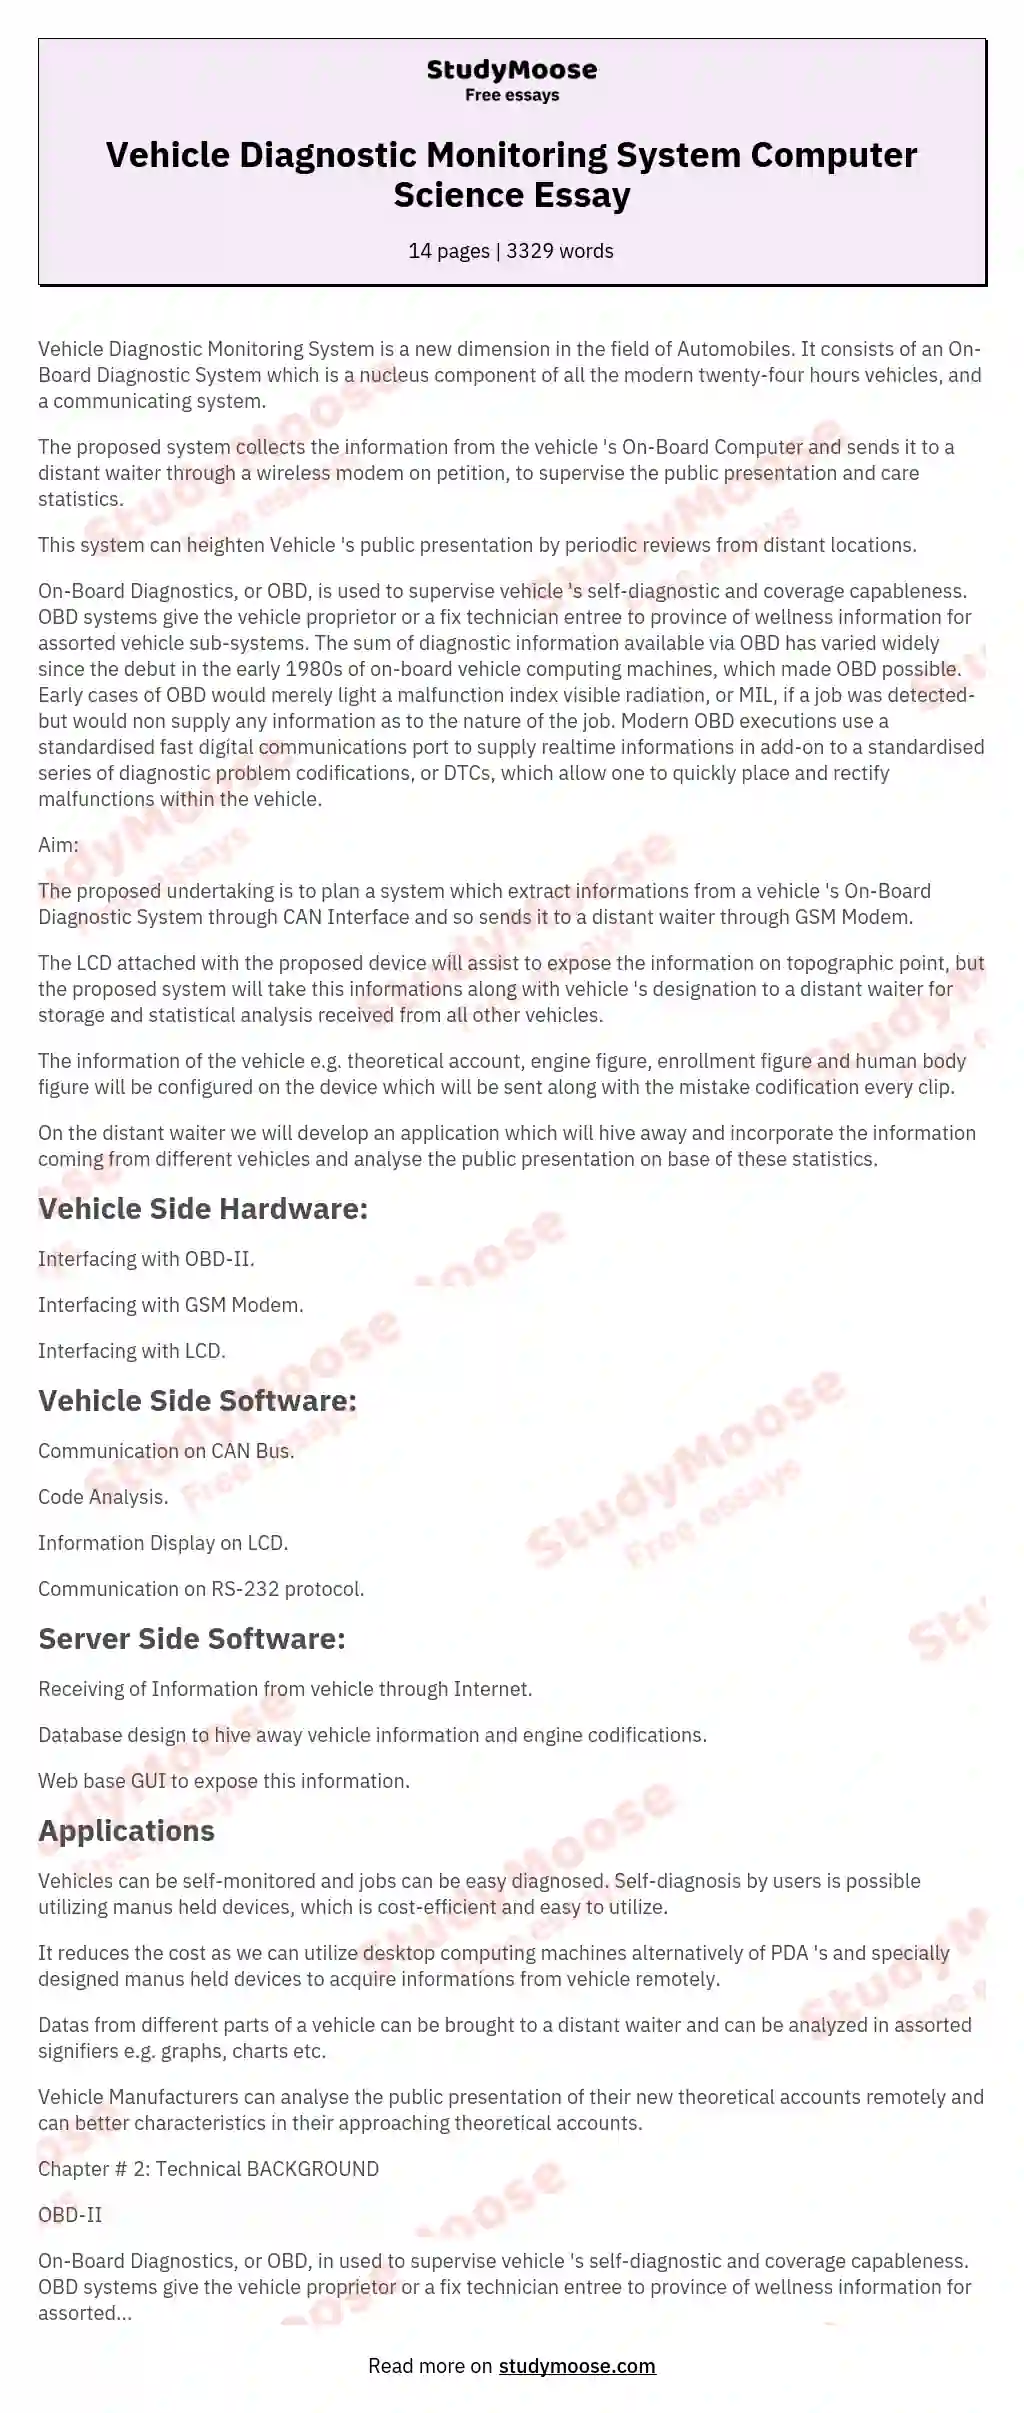 Vehicle Diagnostic Monitoring System Computer Science Essay